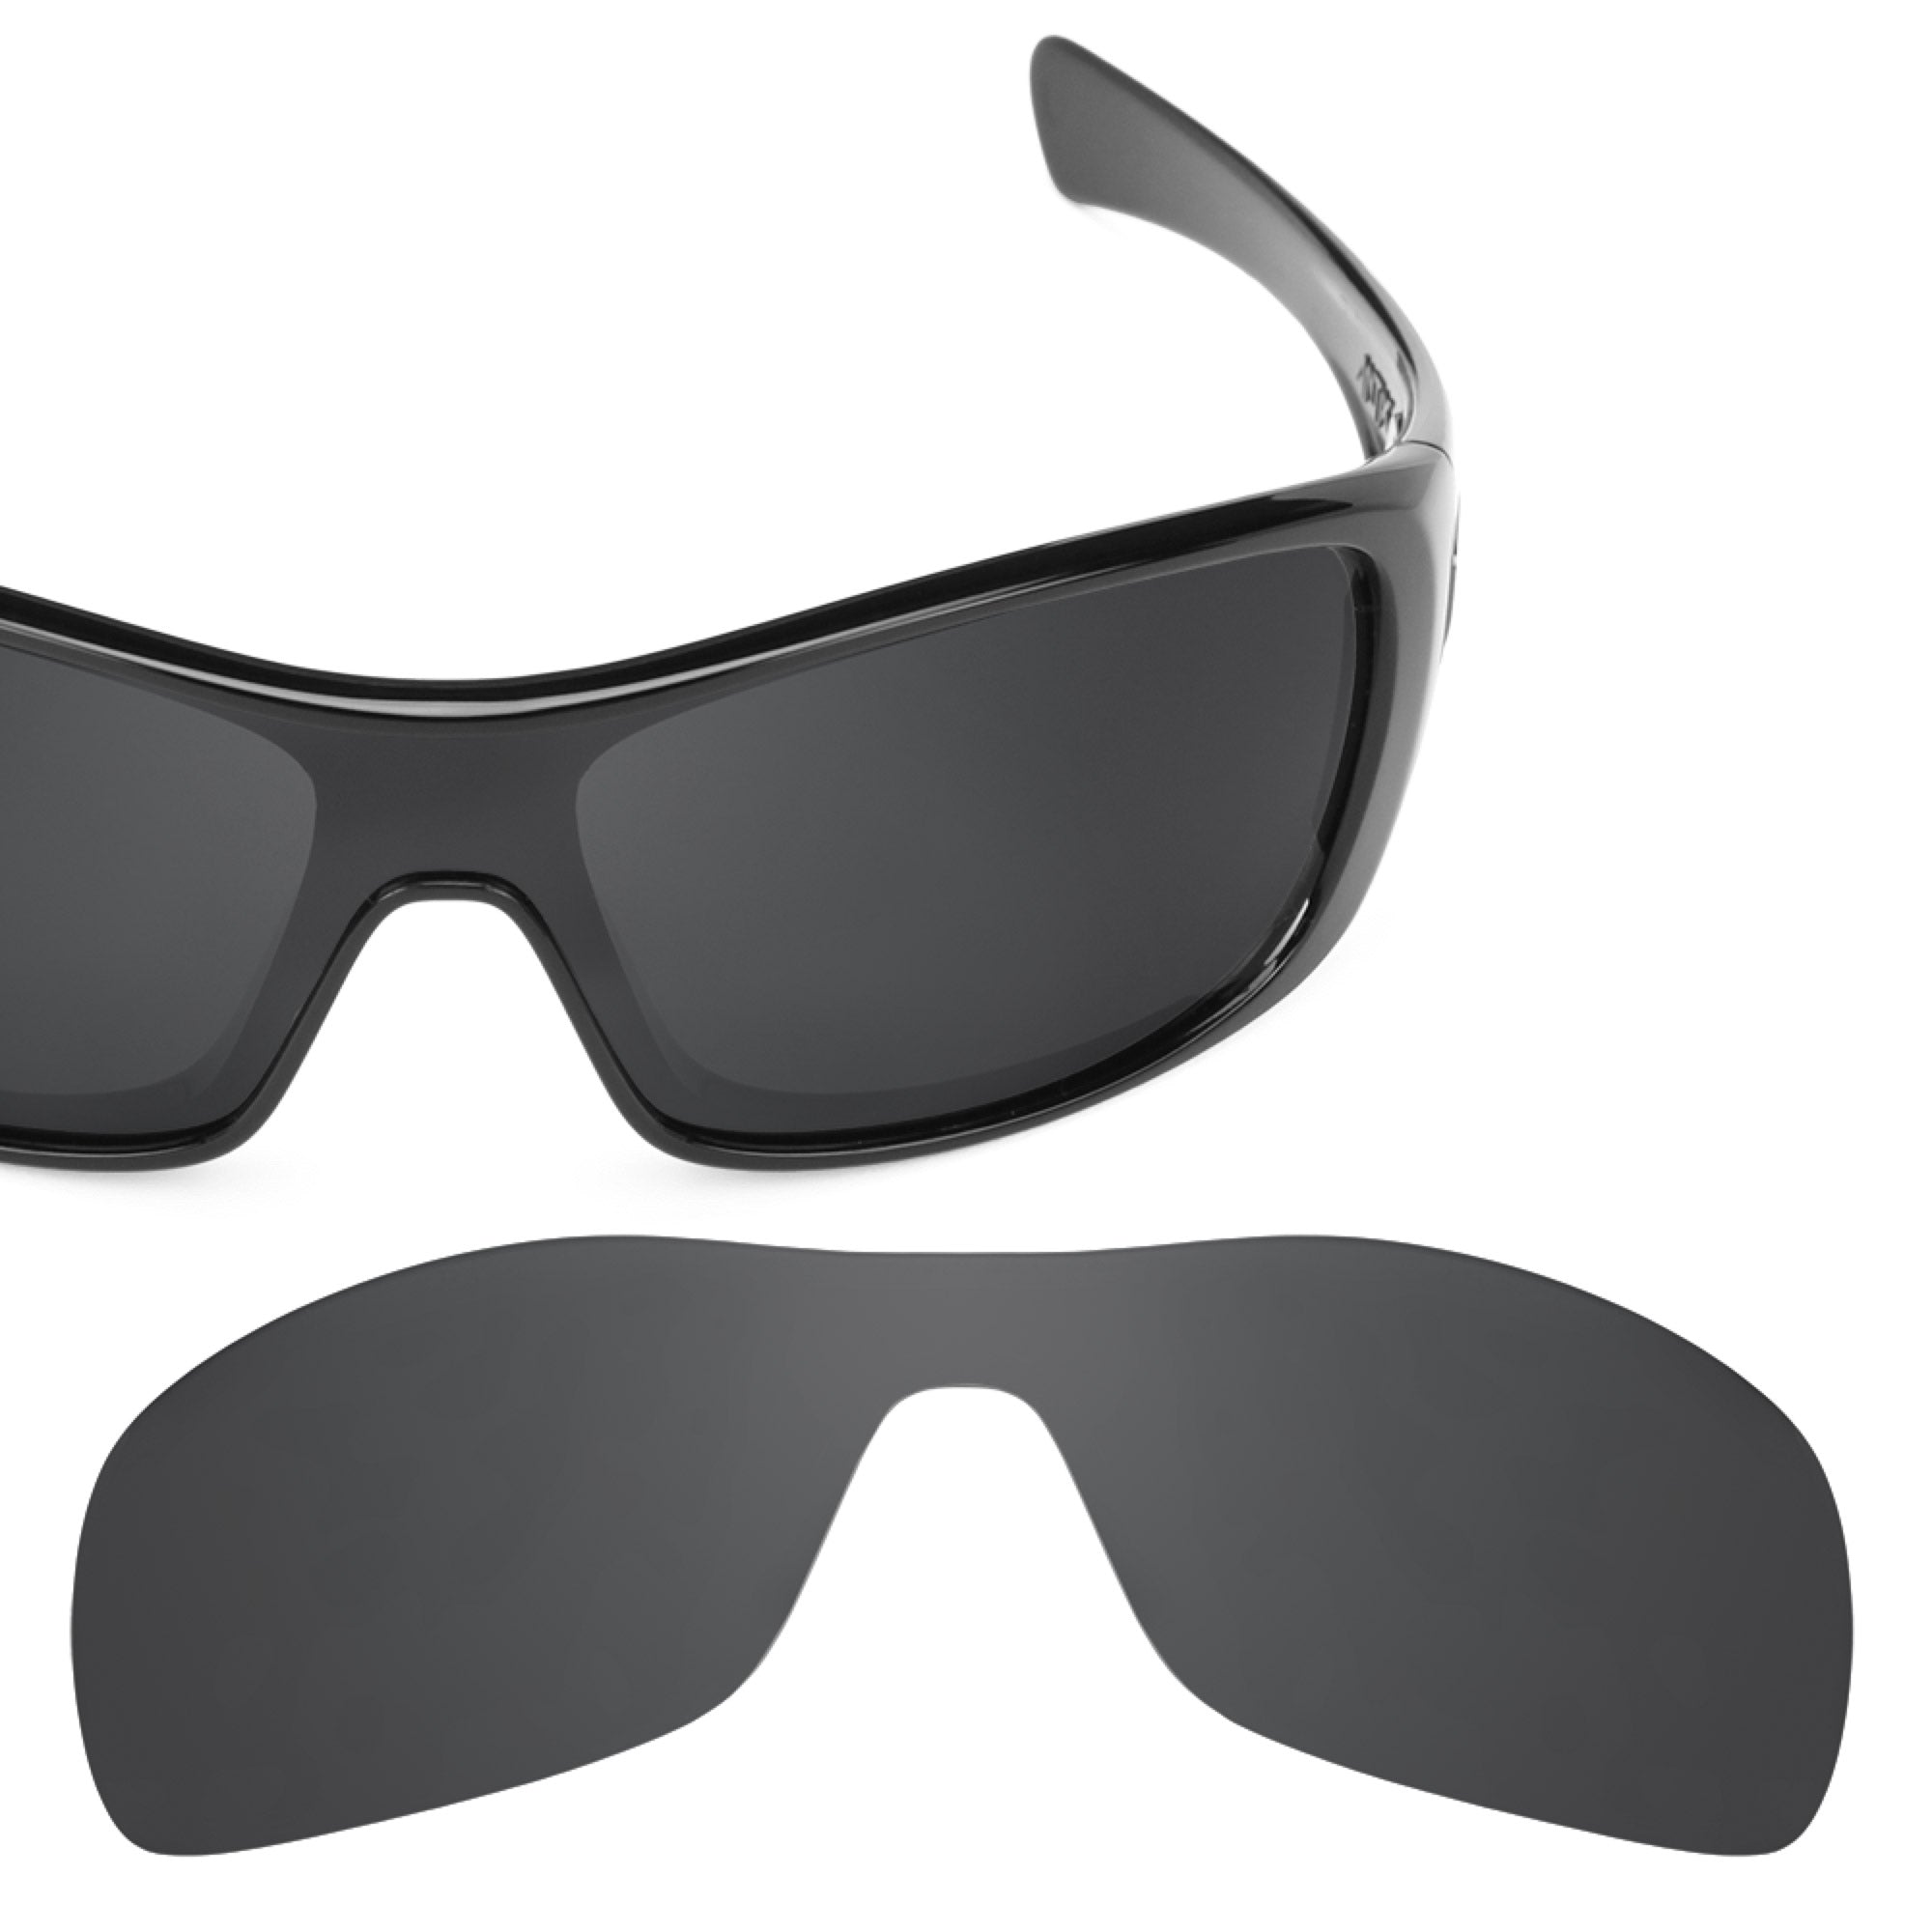 Wiley X WX Talon Changeable Sunglasses Rx Ready with High Velocity  Protection - Matte Black w Frame with Smoke Grey - Clear - Light Rust Lens  Kit with Rx Insert